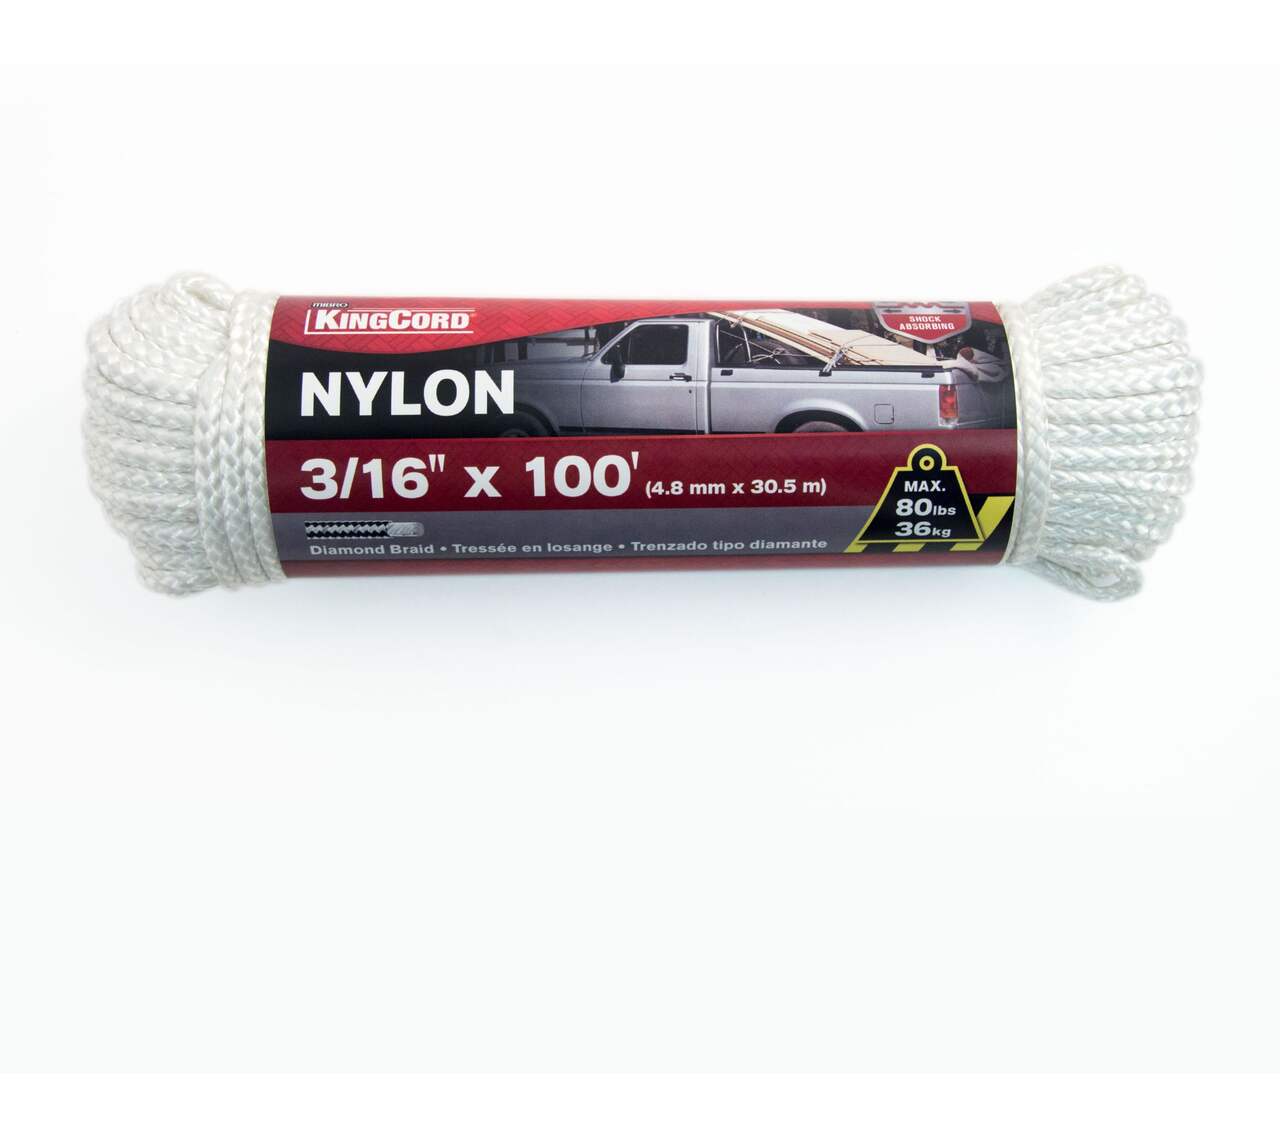 KingCord Nylon Braided Rope Resists, UV Stabilized, Flexible and